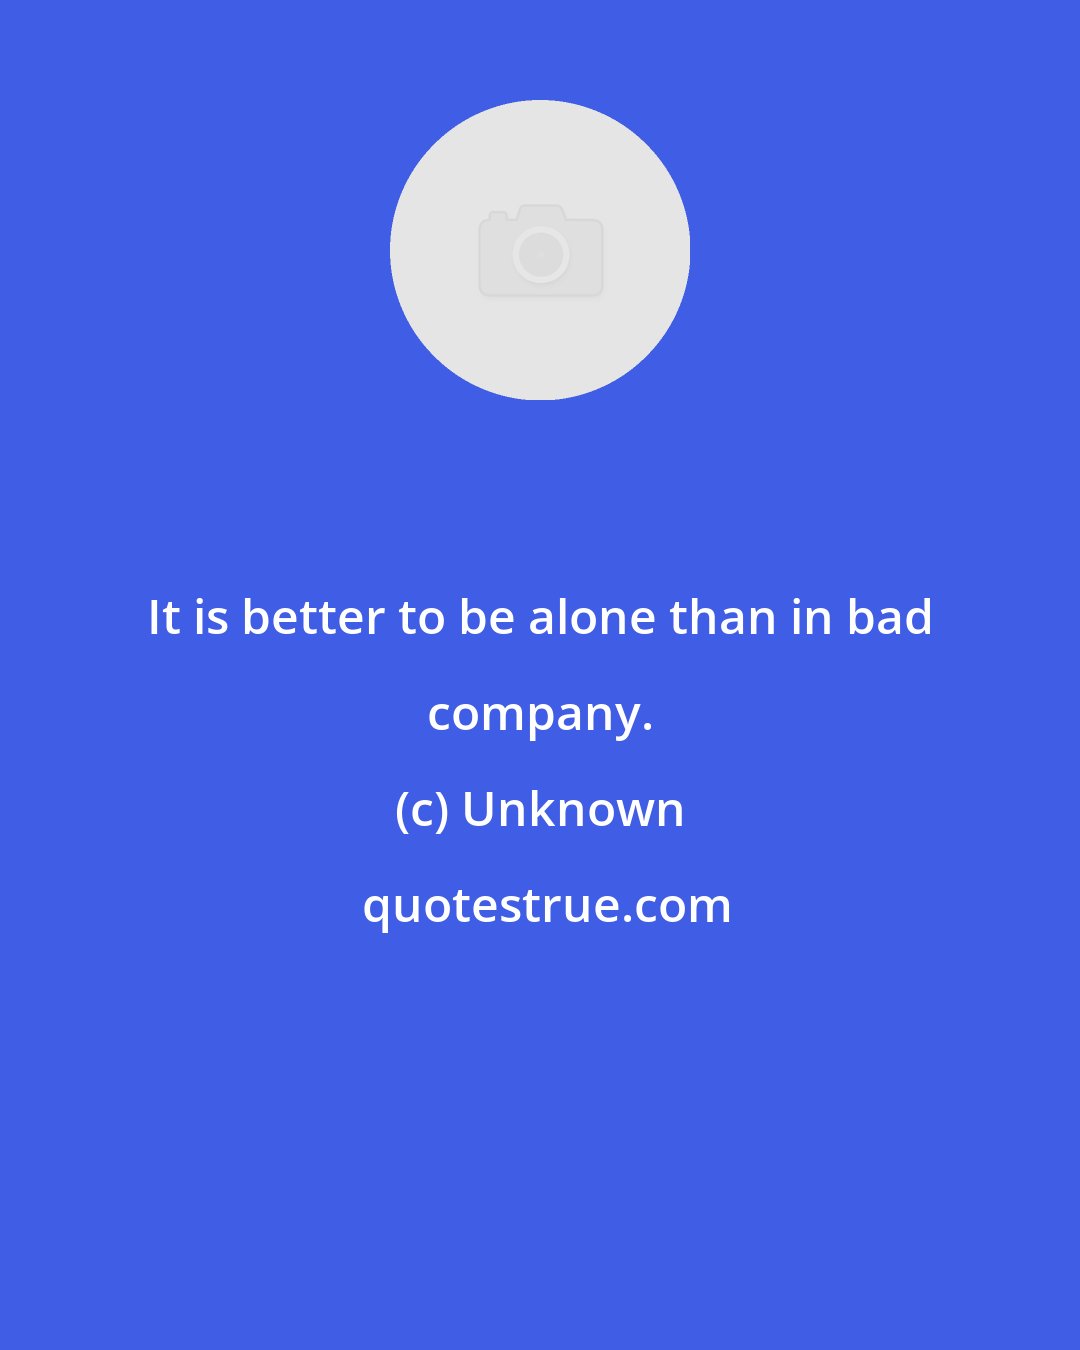 Unknown: It is better to be alone than in bad company.